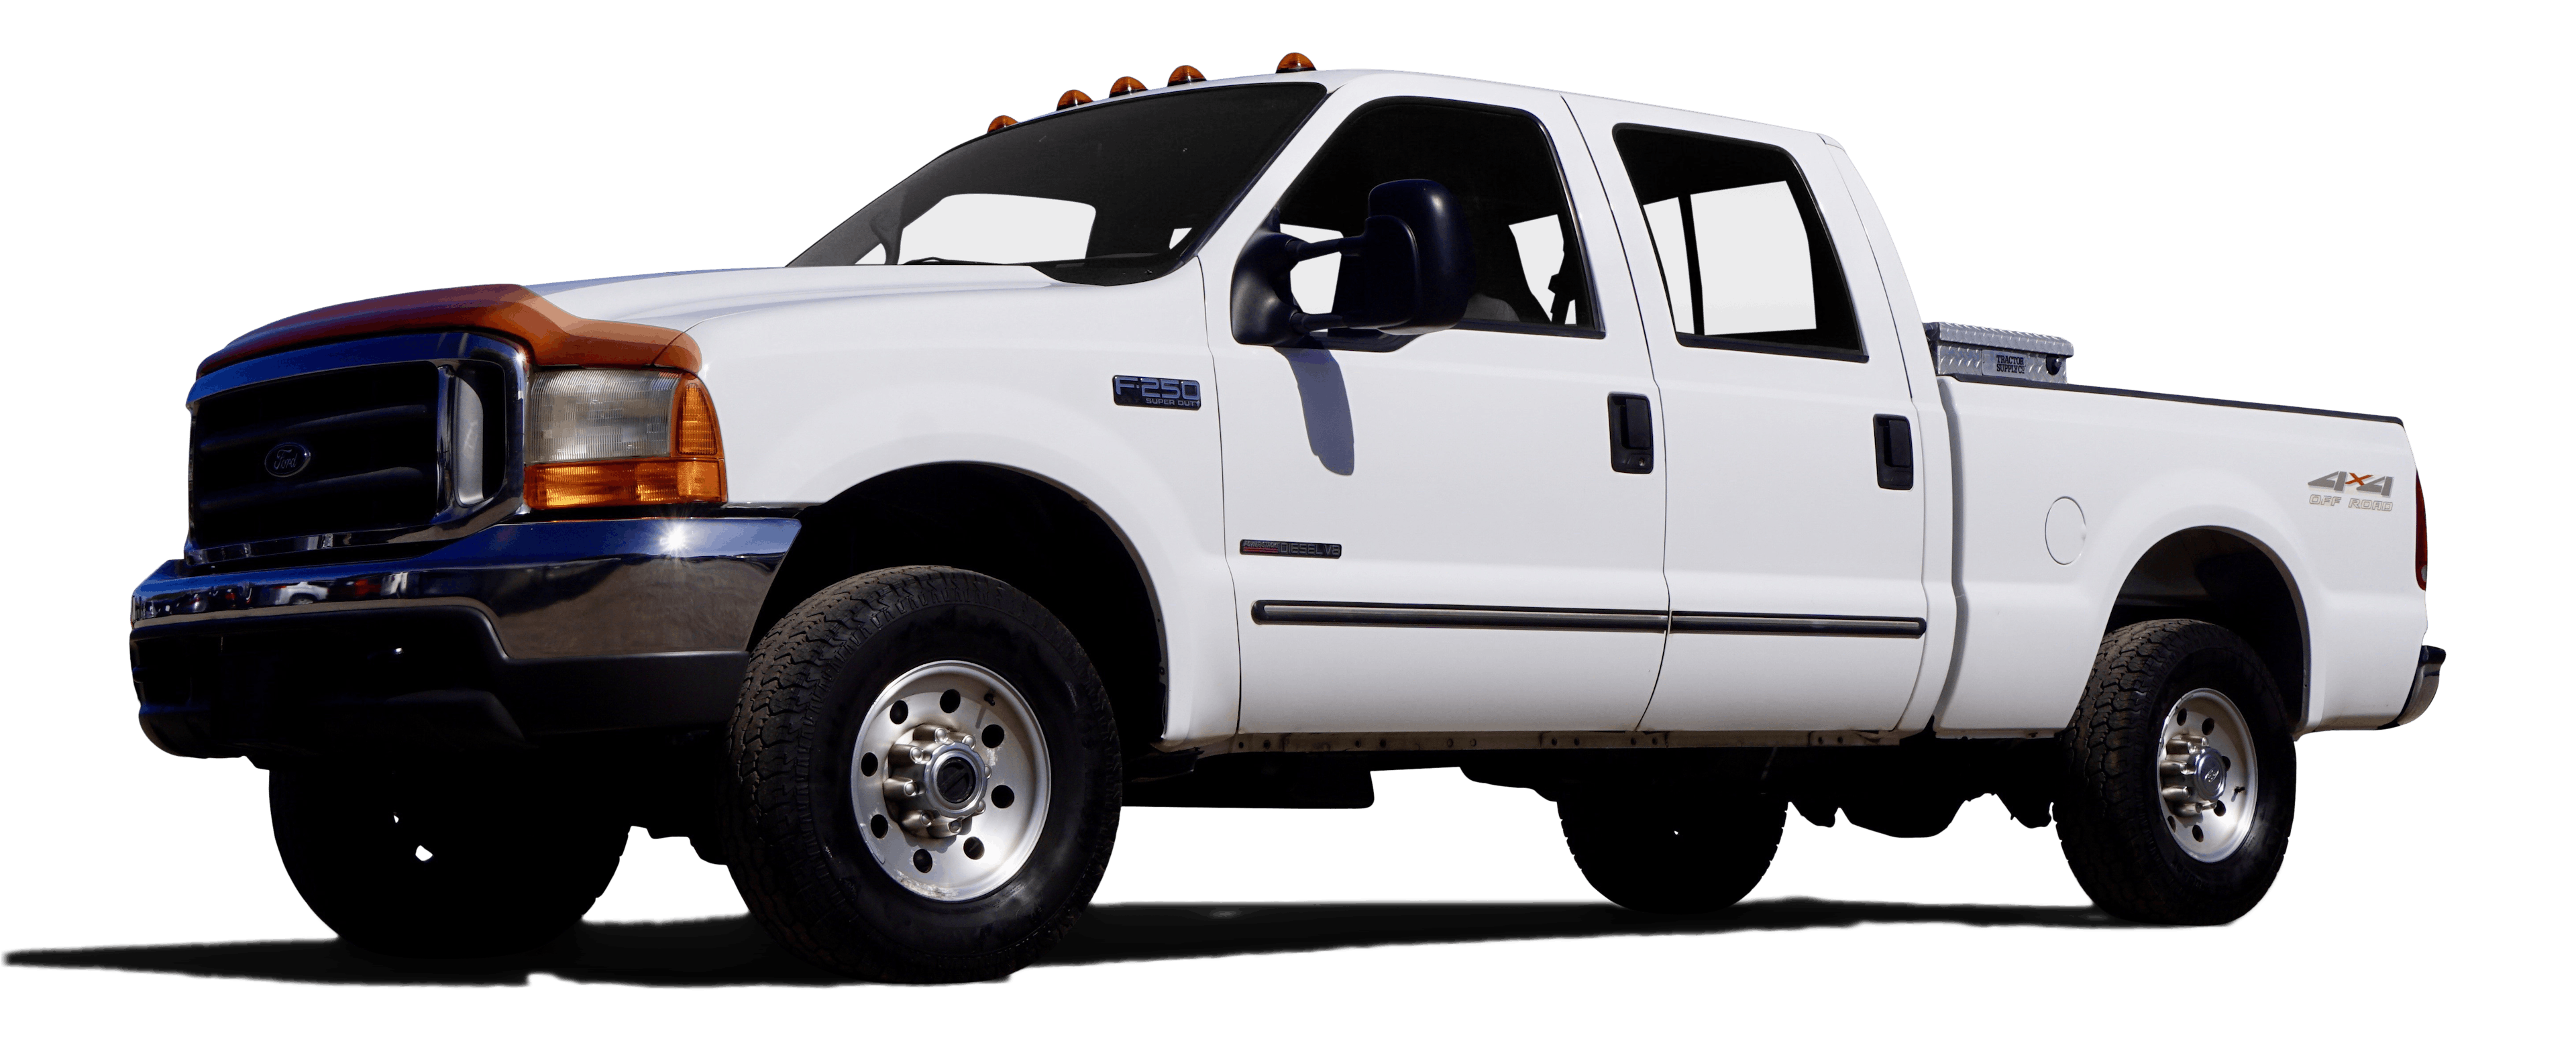 1999 Ford F250